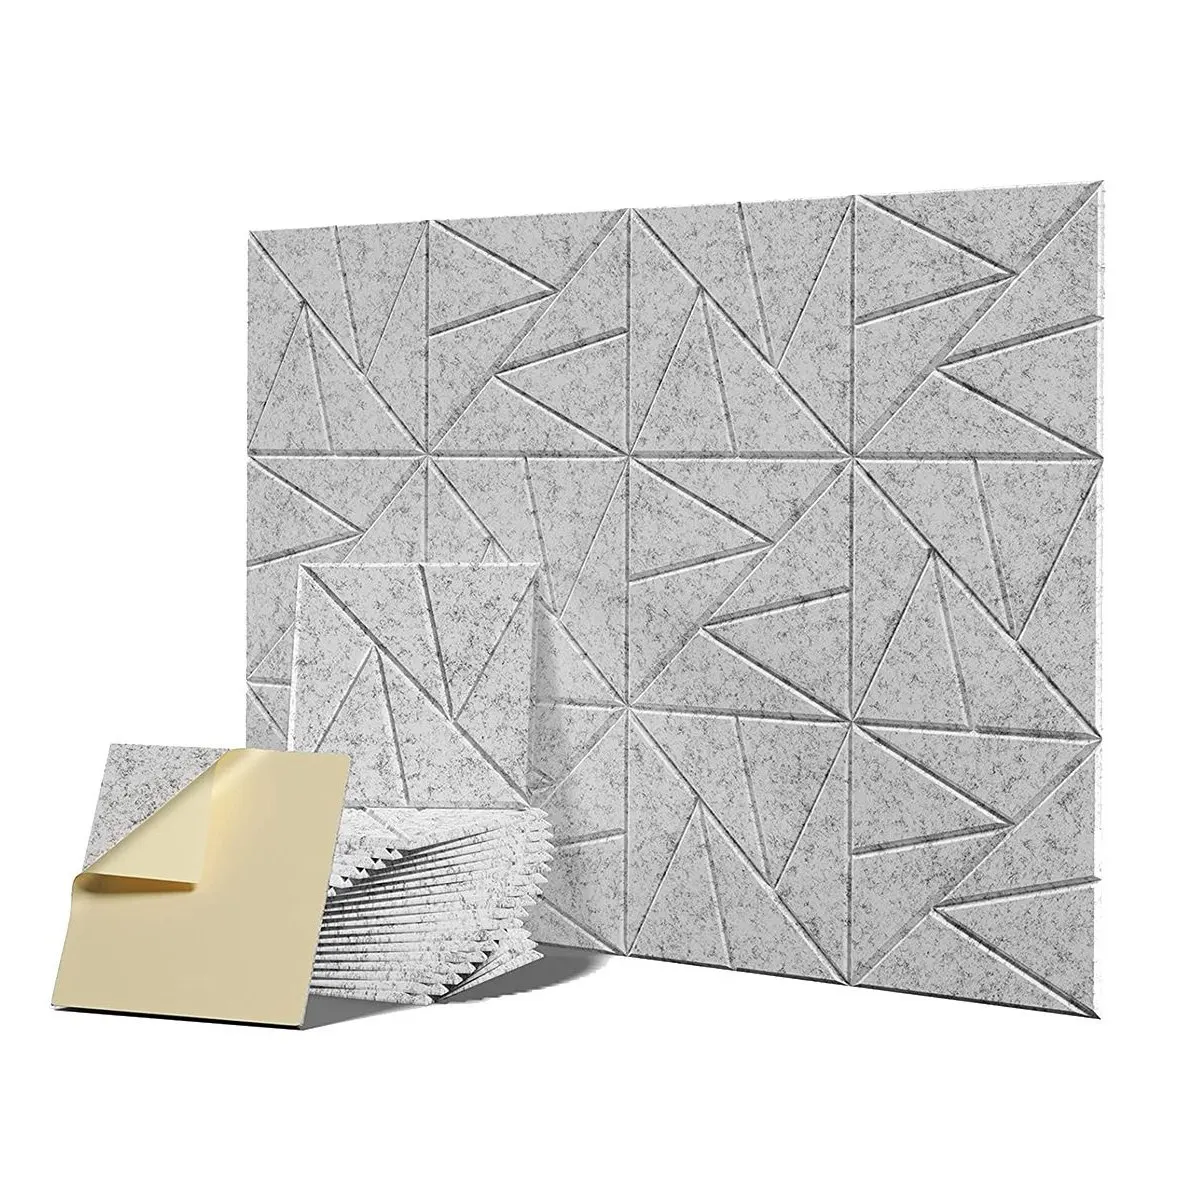 

12Pack Acoustic Panels with Self-Adhesive, 12X 12X 0.4Inch Sound Proof Foam Panels,Sound Panels High Density,Silver Grey